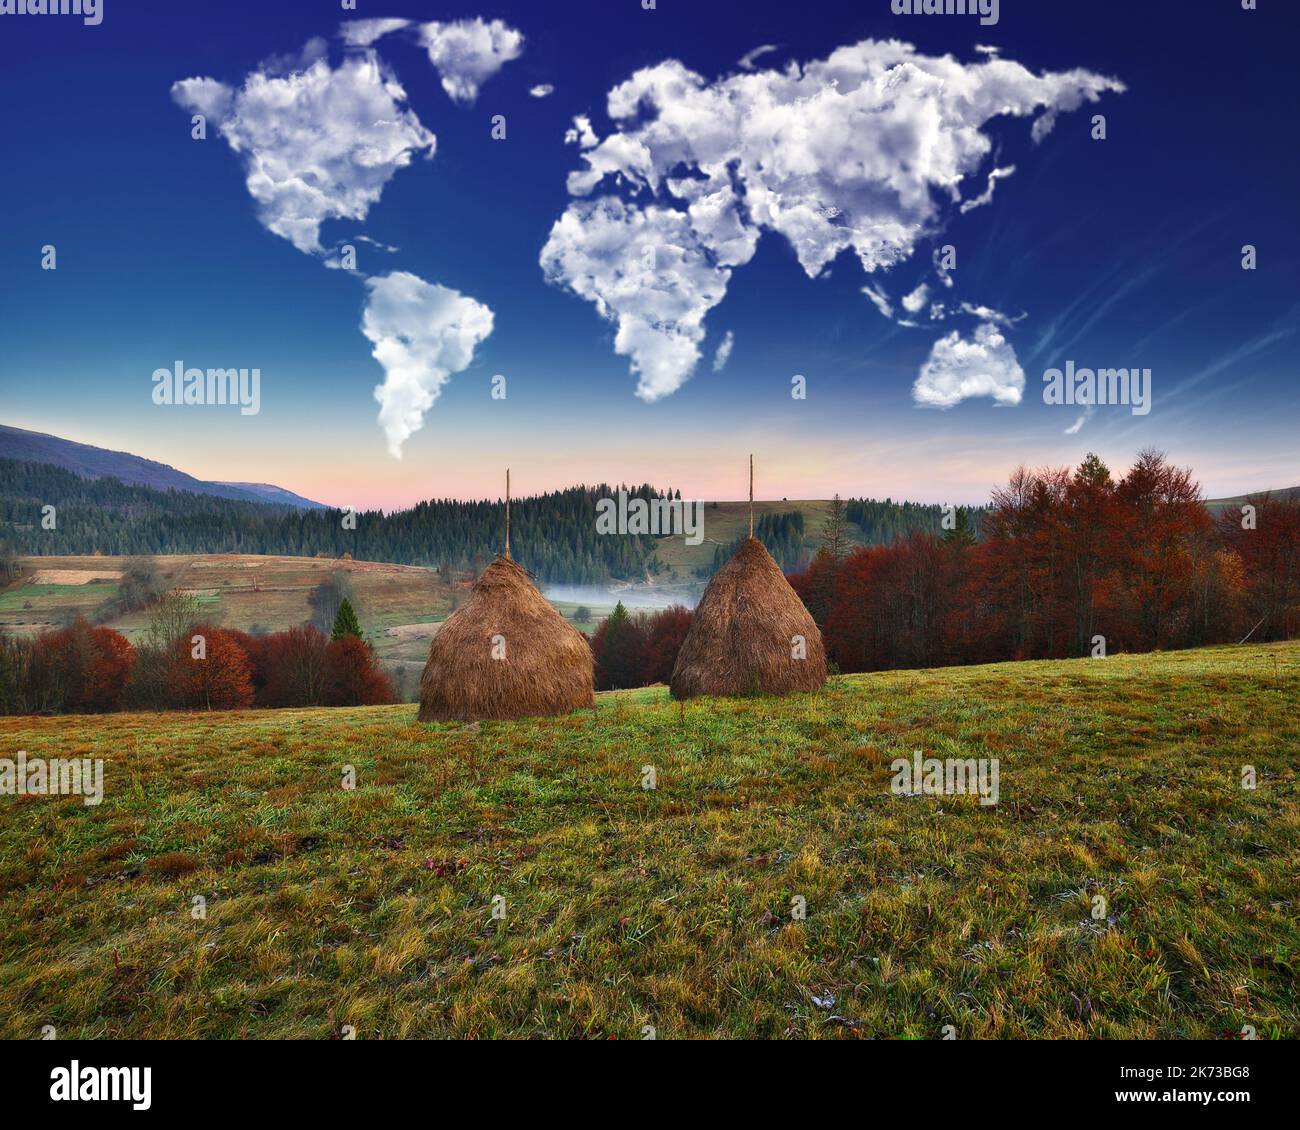 clouds in the form of a map of the world over the mountains. autumn dawn in the Carpathians. Travel and landscape concept Stock Photo